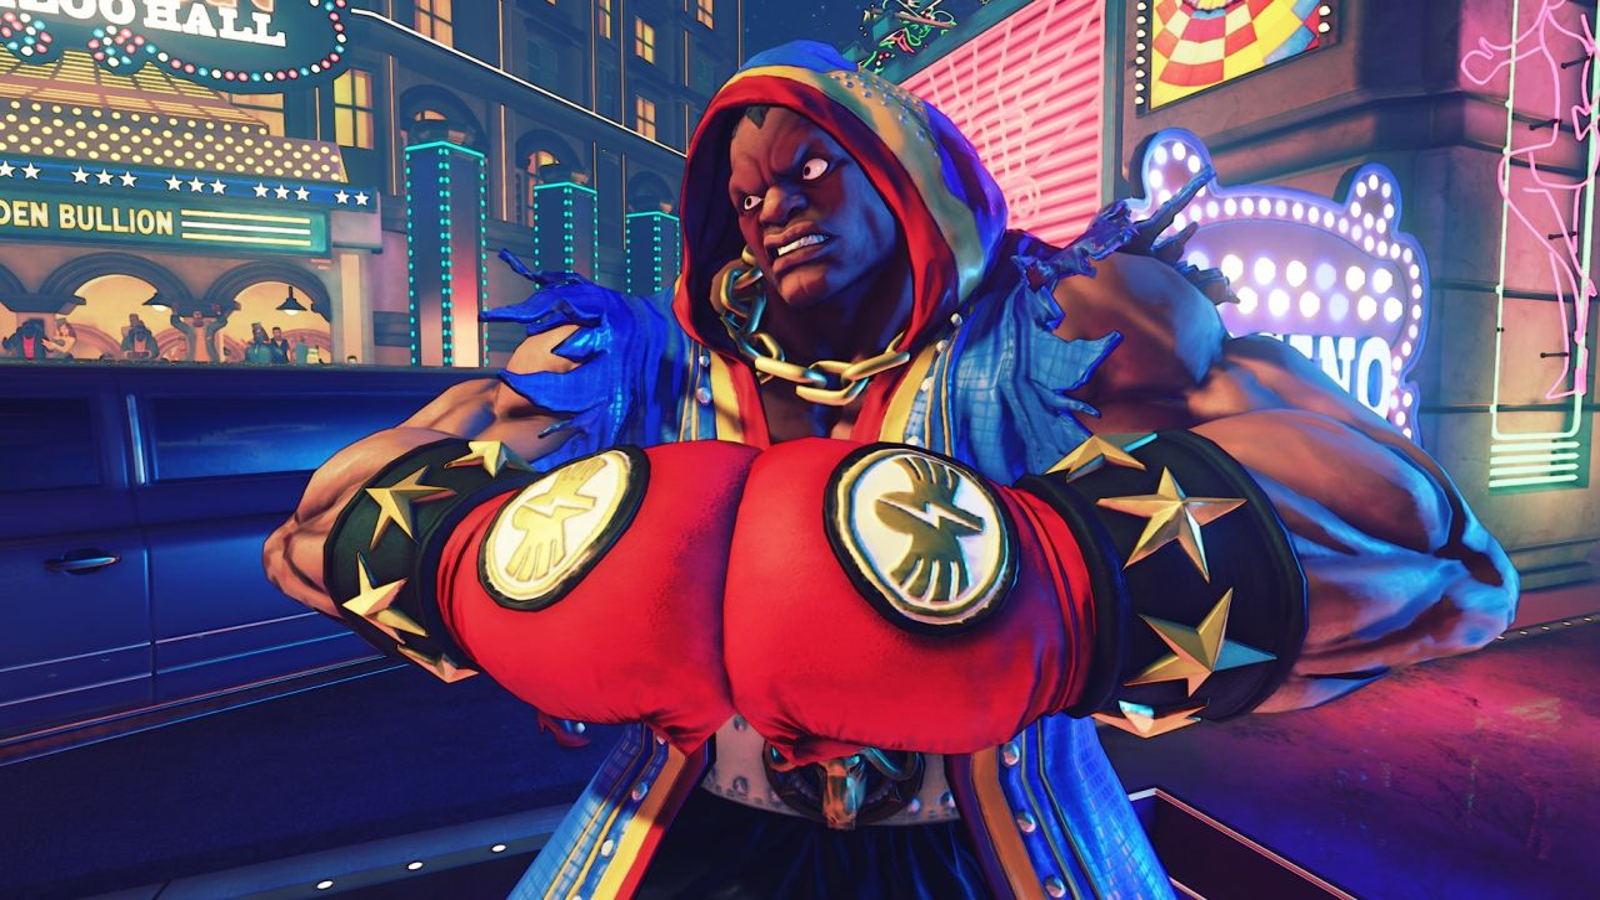 Street fighter players: The Top 10 earners in SFV